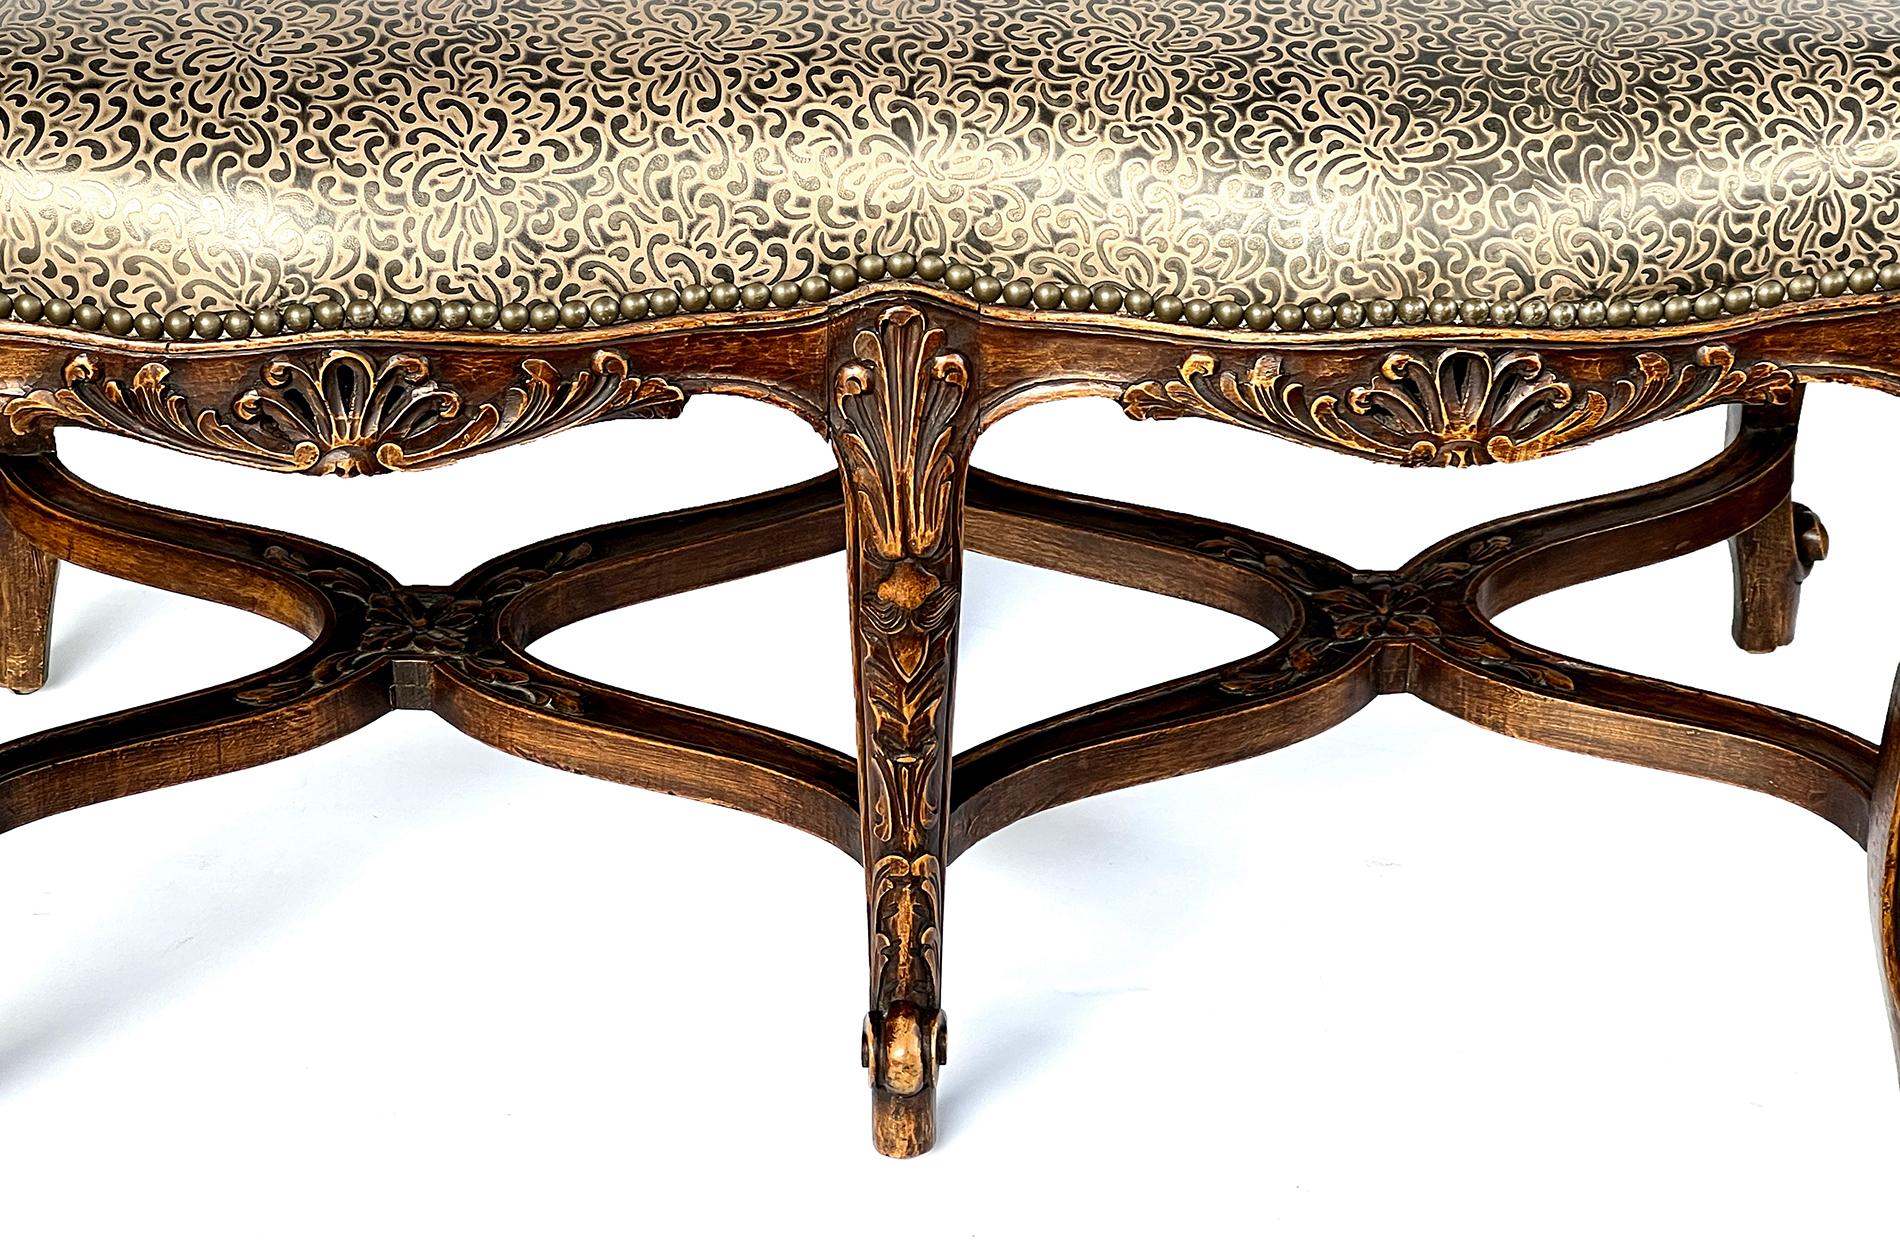 the shaped leather seat above a conforming frame adorned with carved rocaille and foliate motifs all raised on cabriole supports joined by an undulating stretcher